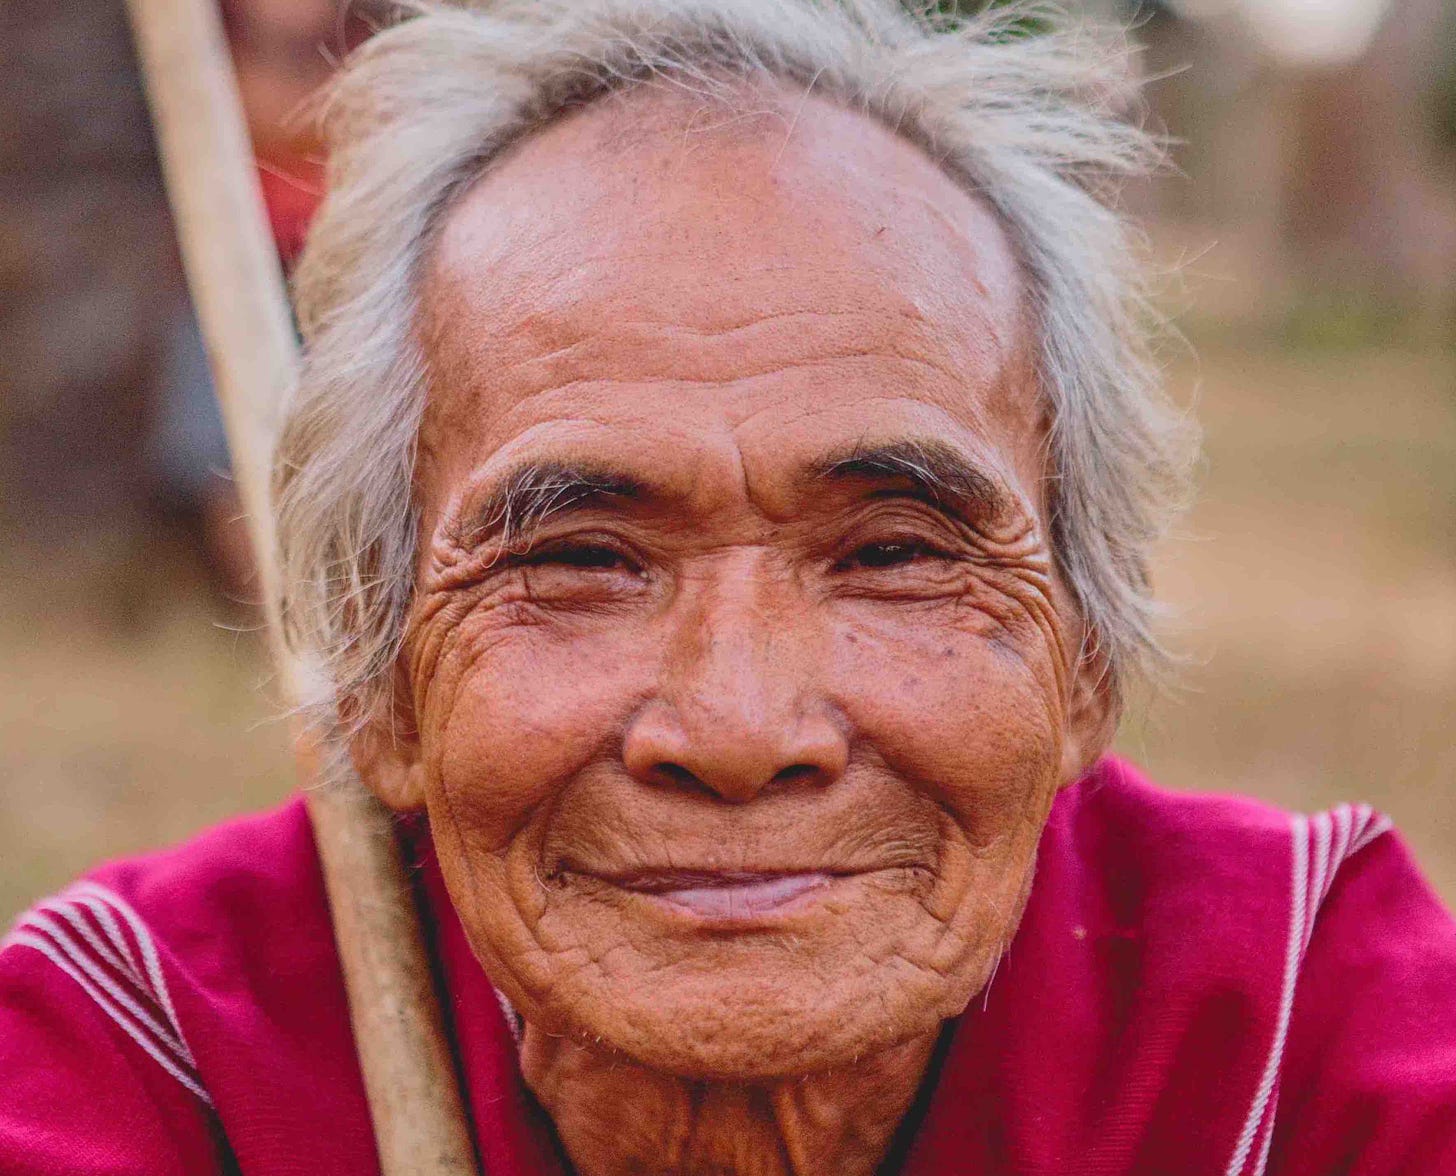 Elderly Tibetan man with wisdom in his eyes showing how we can look when we're old living a high vibration life